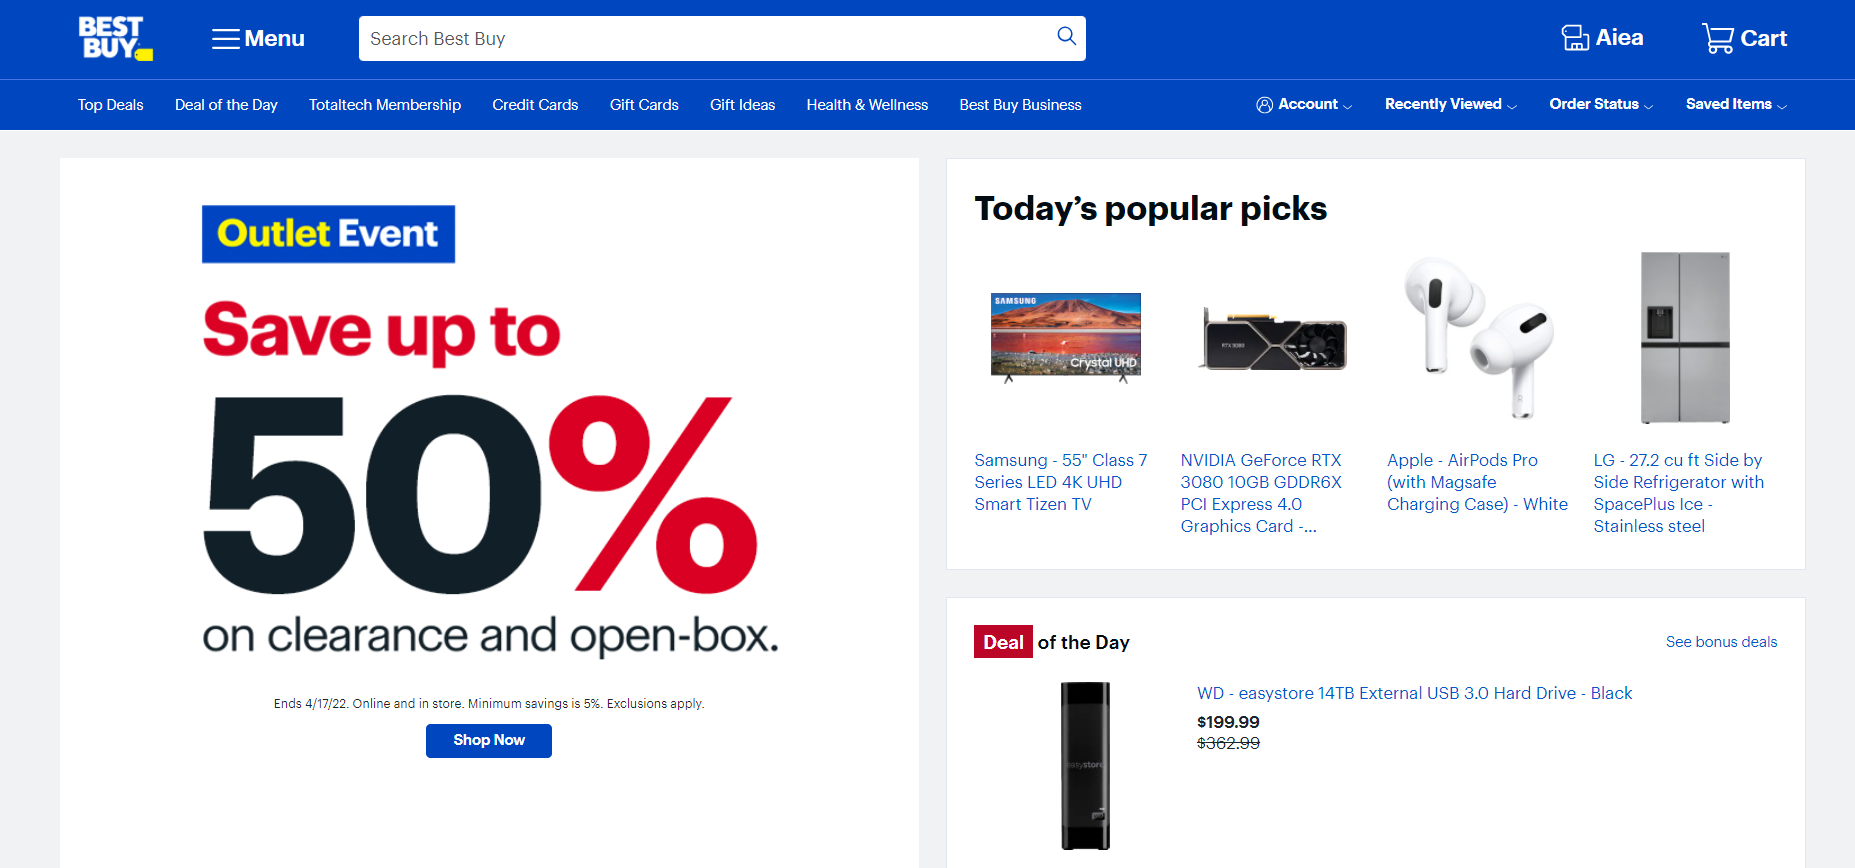 ARE BEST BUY OPEN BOX ITEMS WORTH IT? 